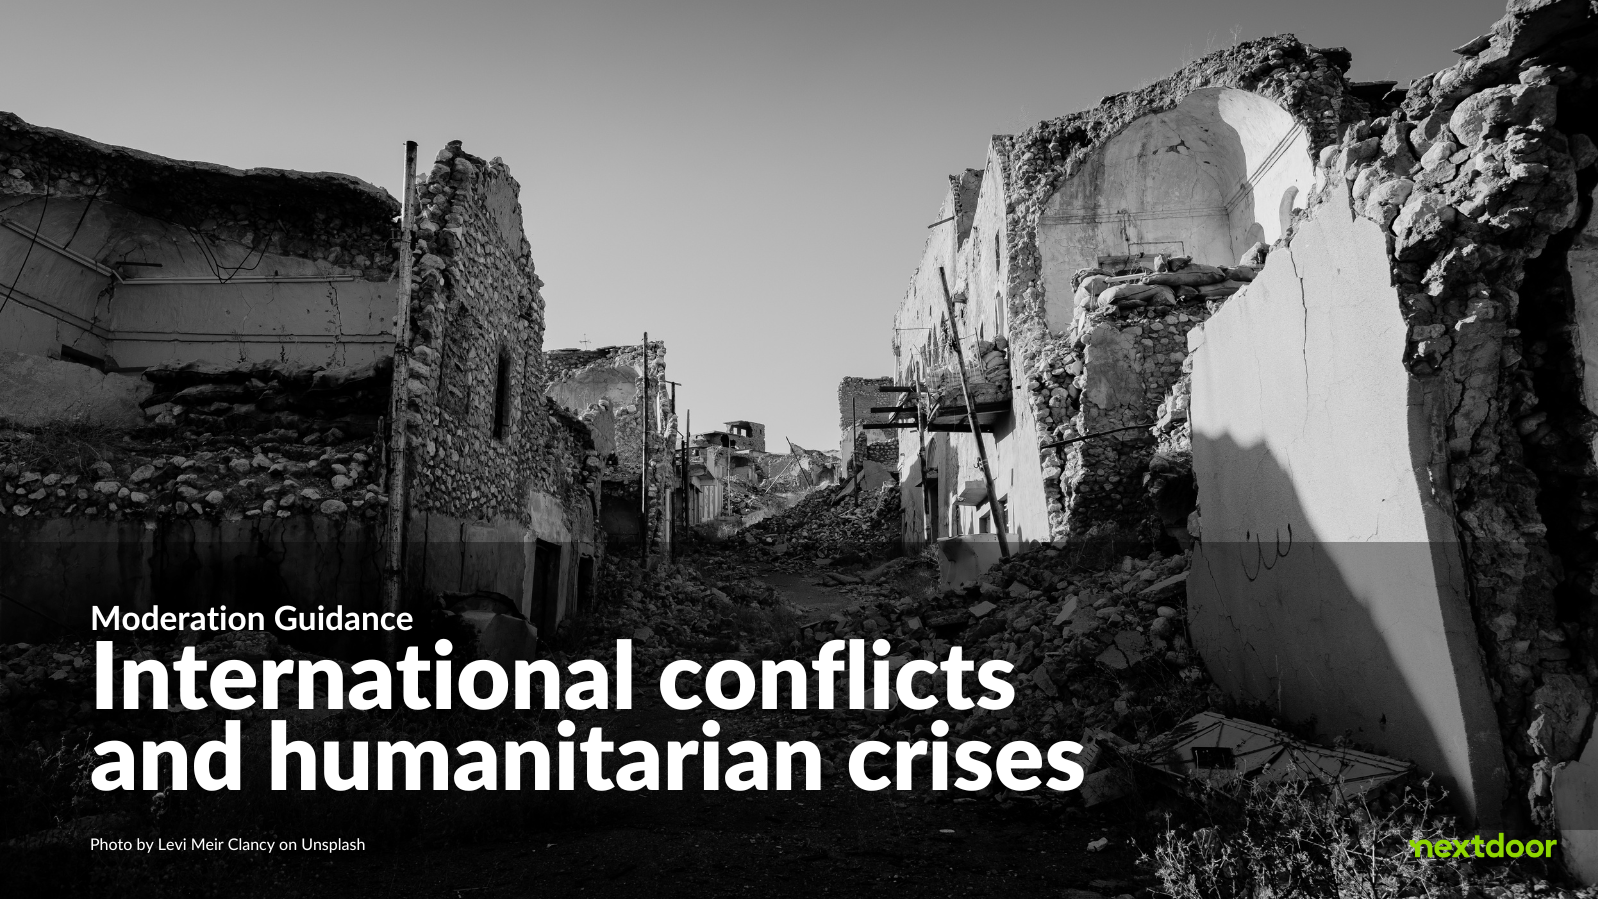 Moderation Guidance: International conflicts and humanitarian crises